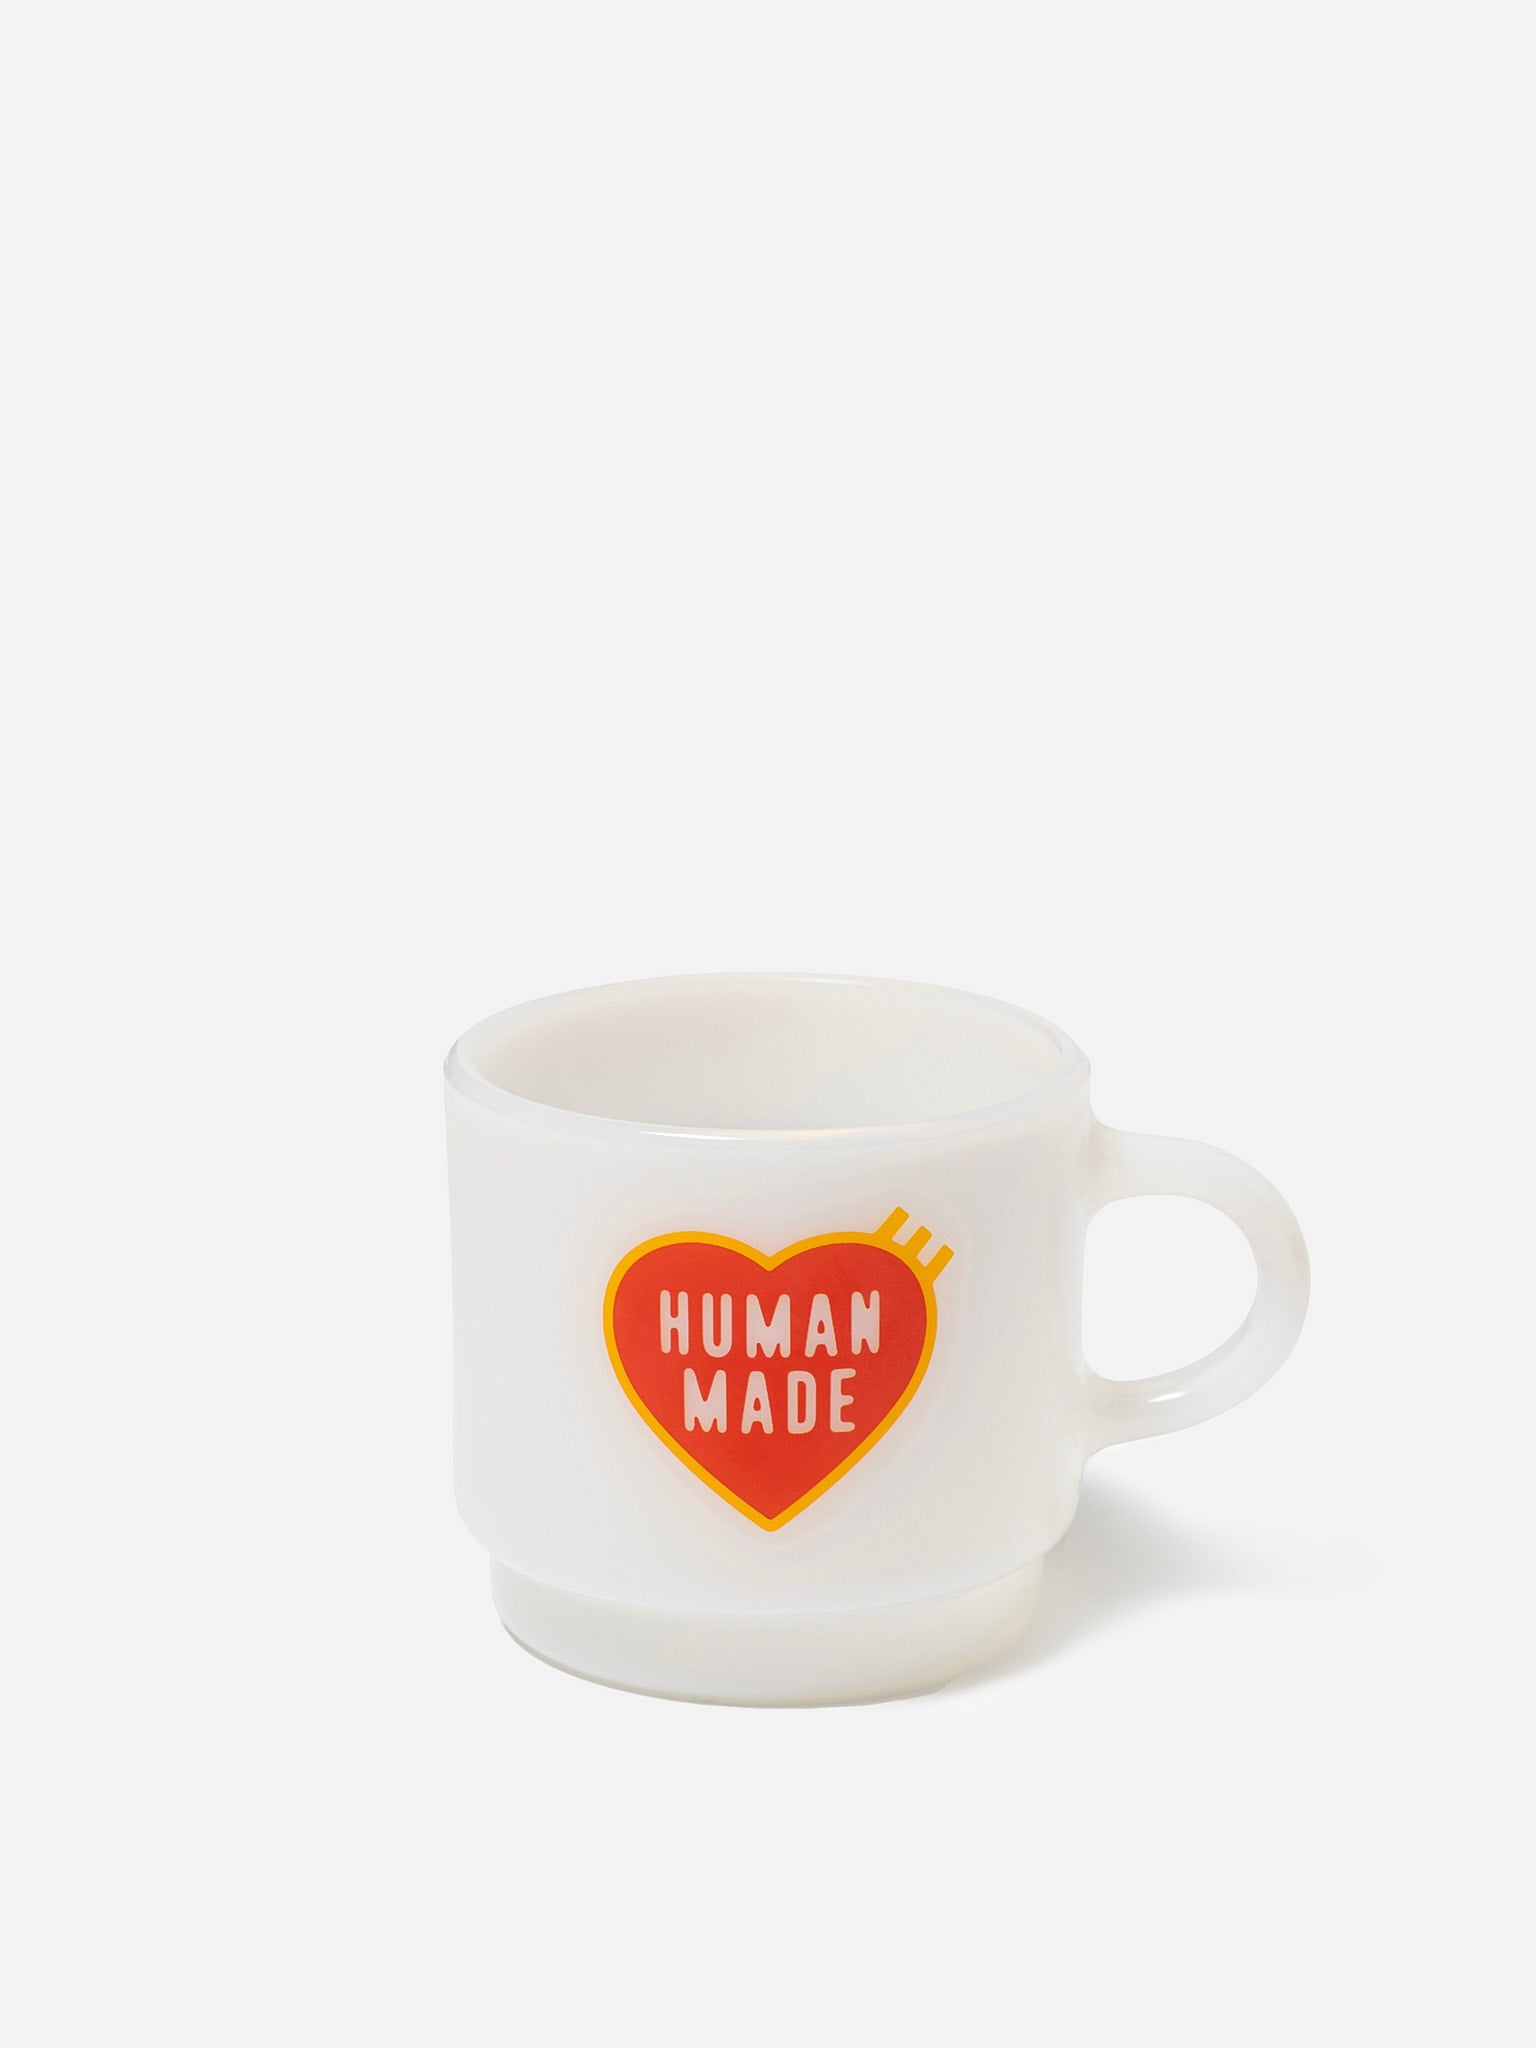 Human Made at Home – OALLERY